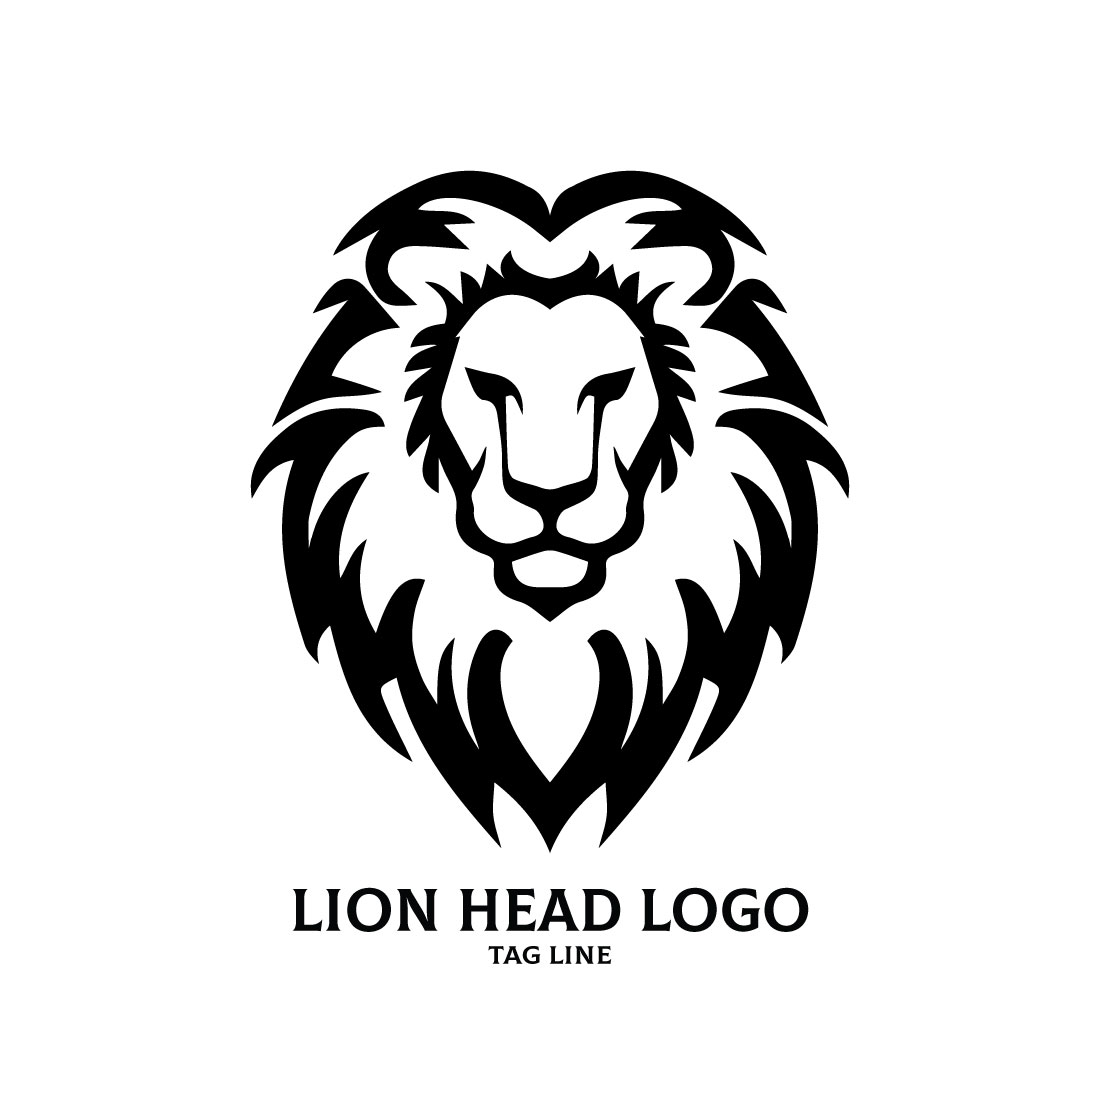 Lion Head Logo Template cover image.